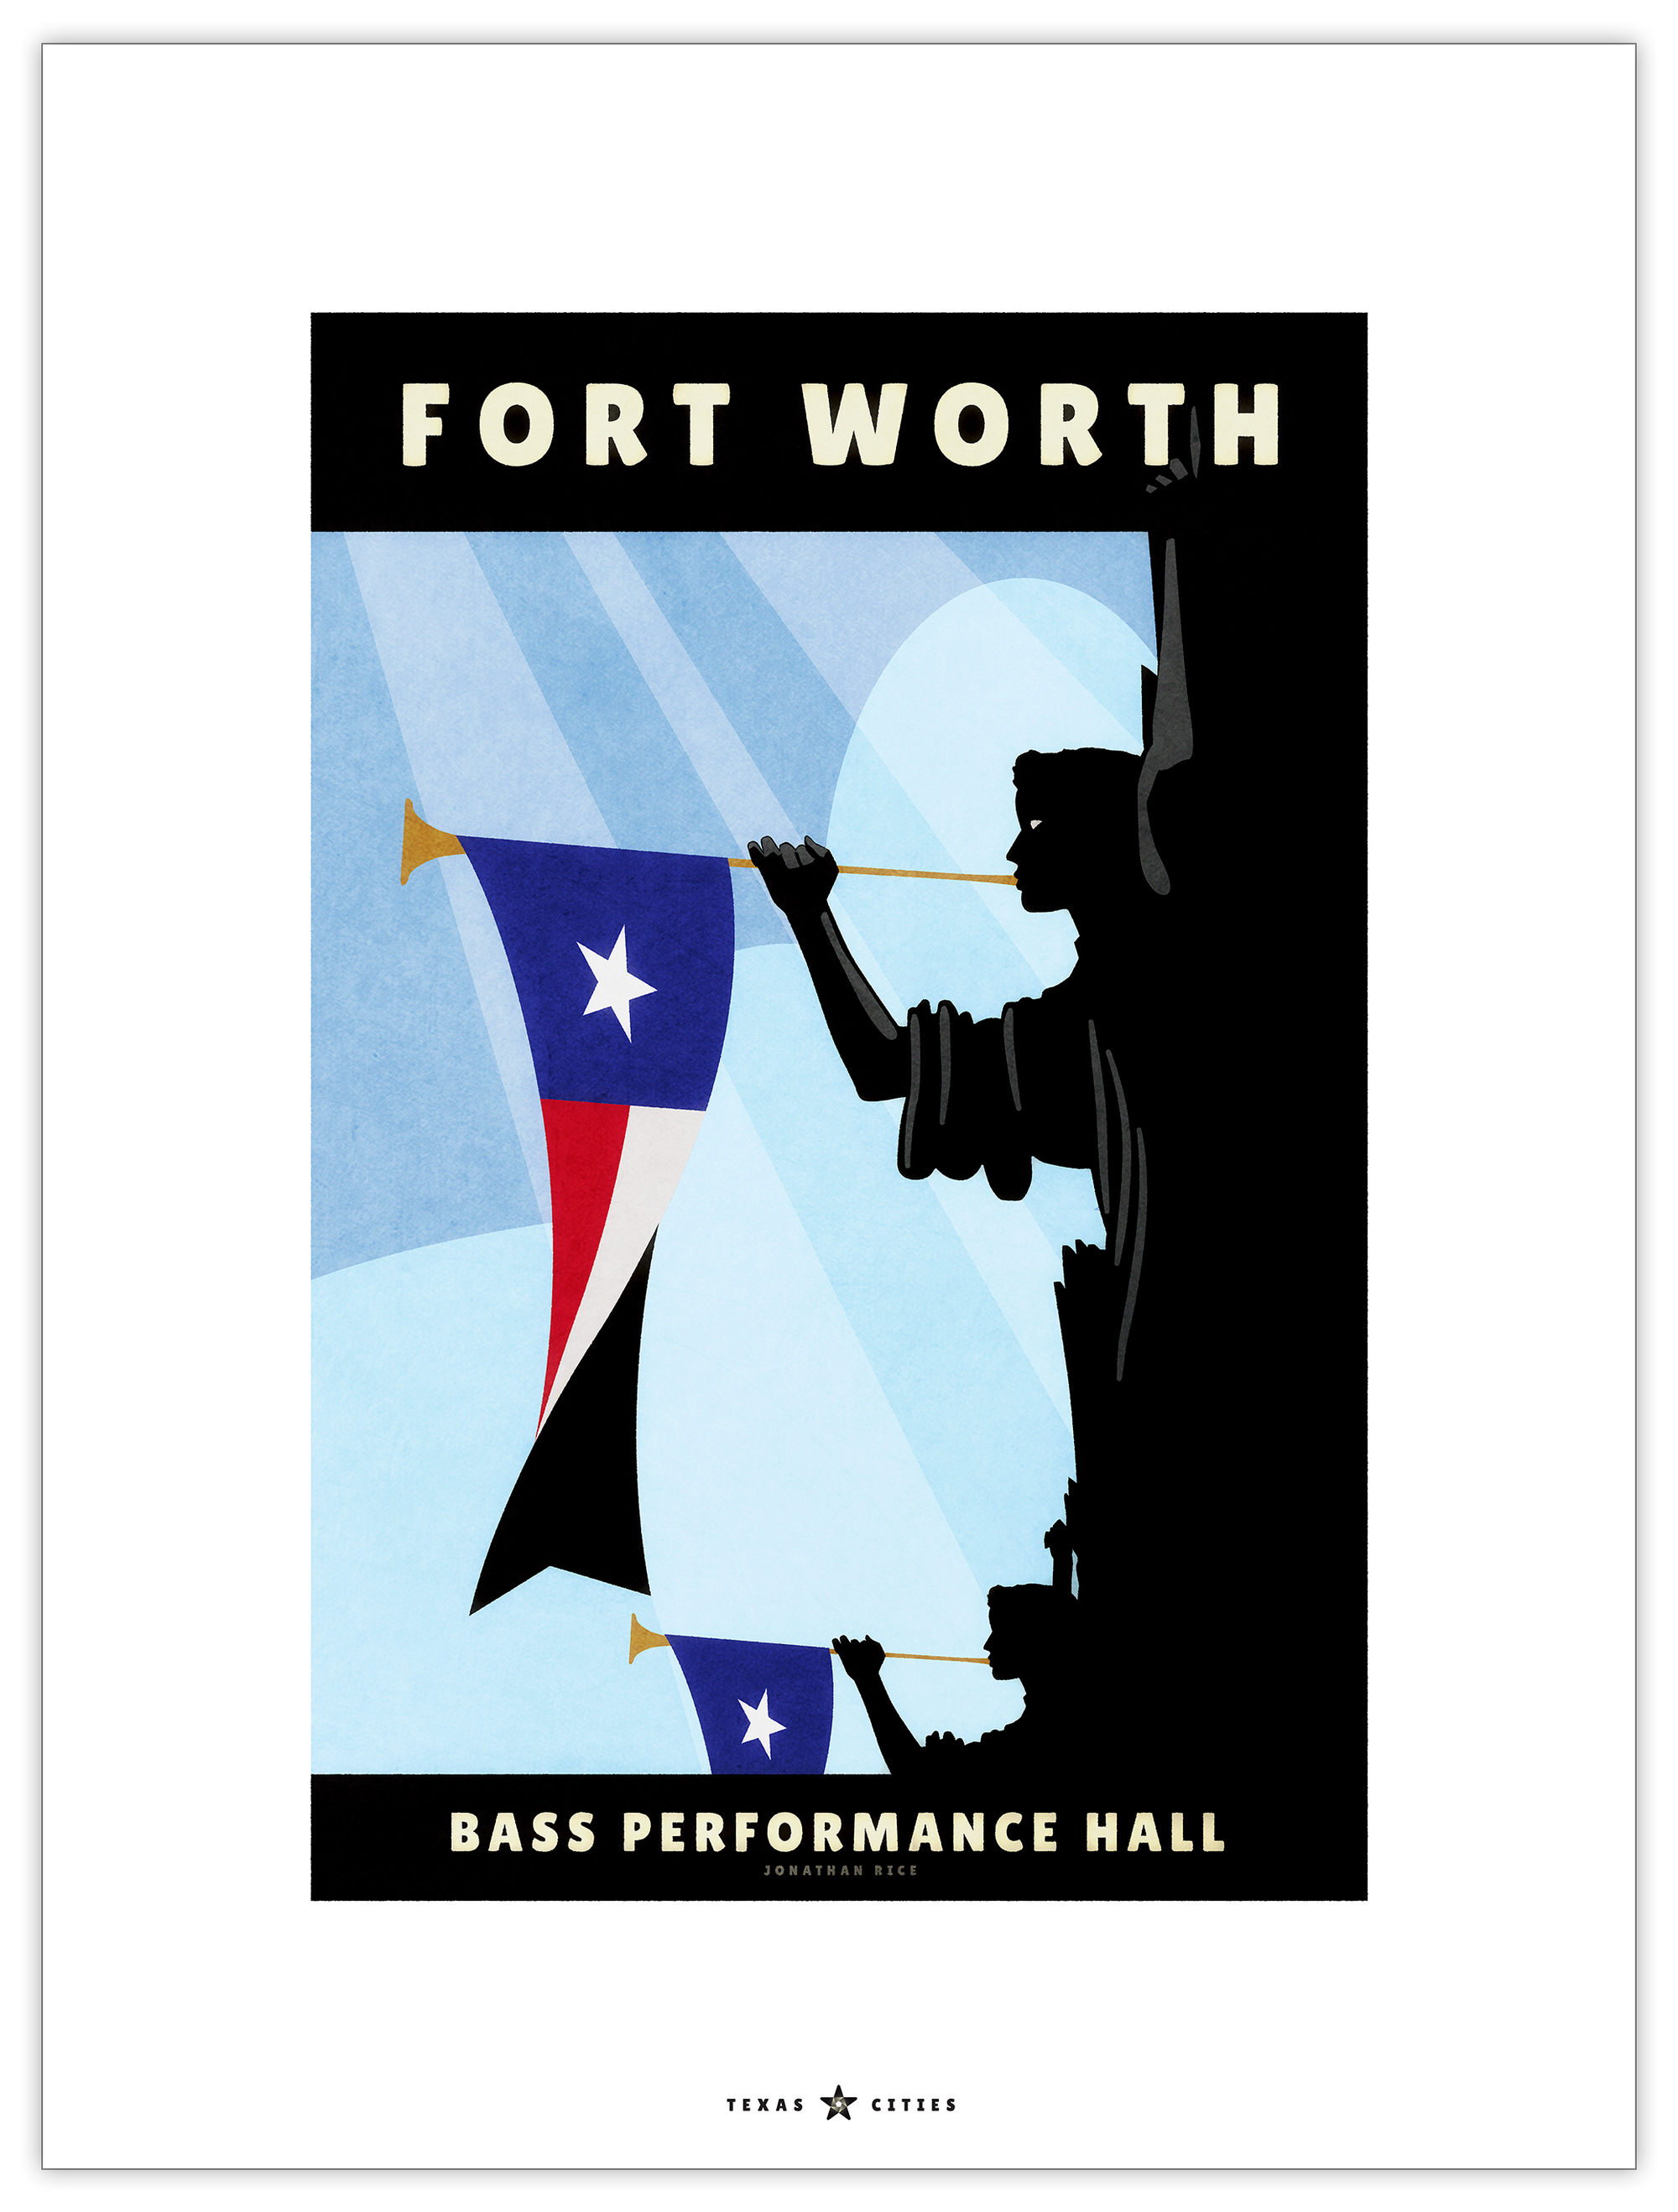 Giclée art print of Angels blowing trumpets on the front of The Bass Performance Hall in Fort Worth, Texas. This Travel Poster is part of the Texas Cities Series.